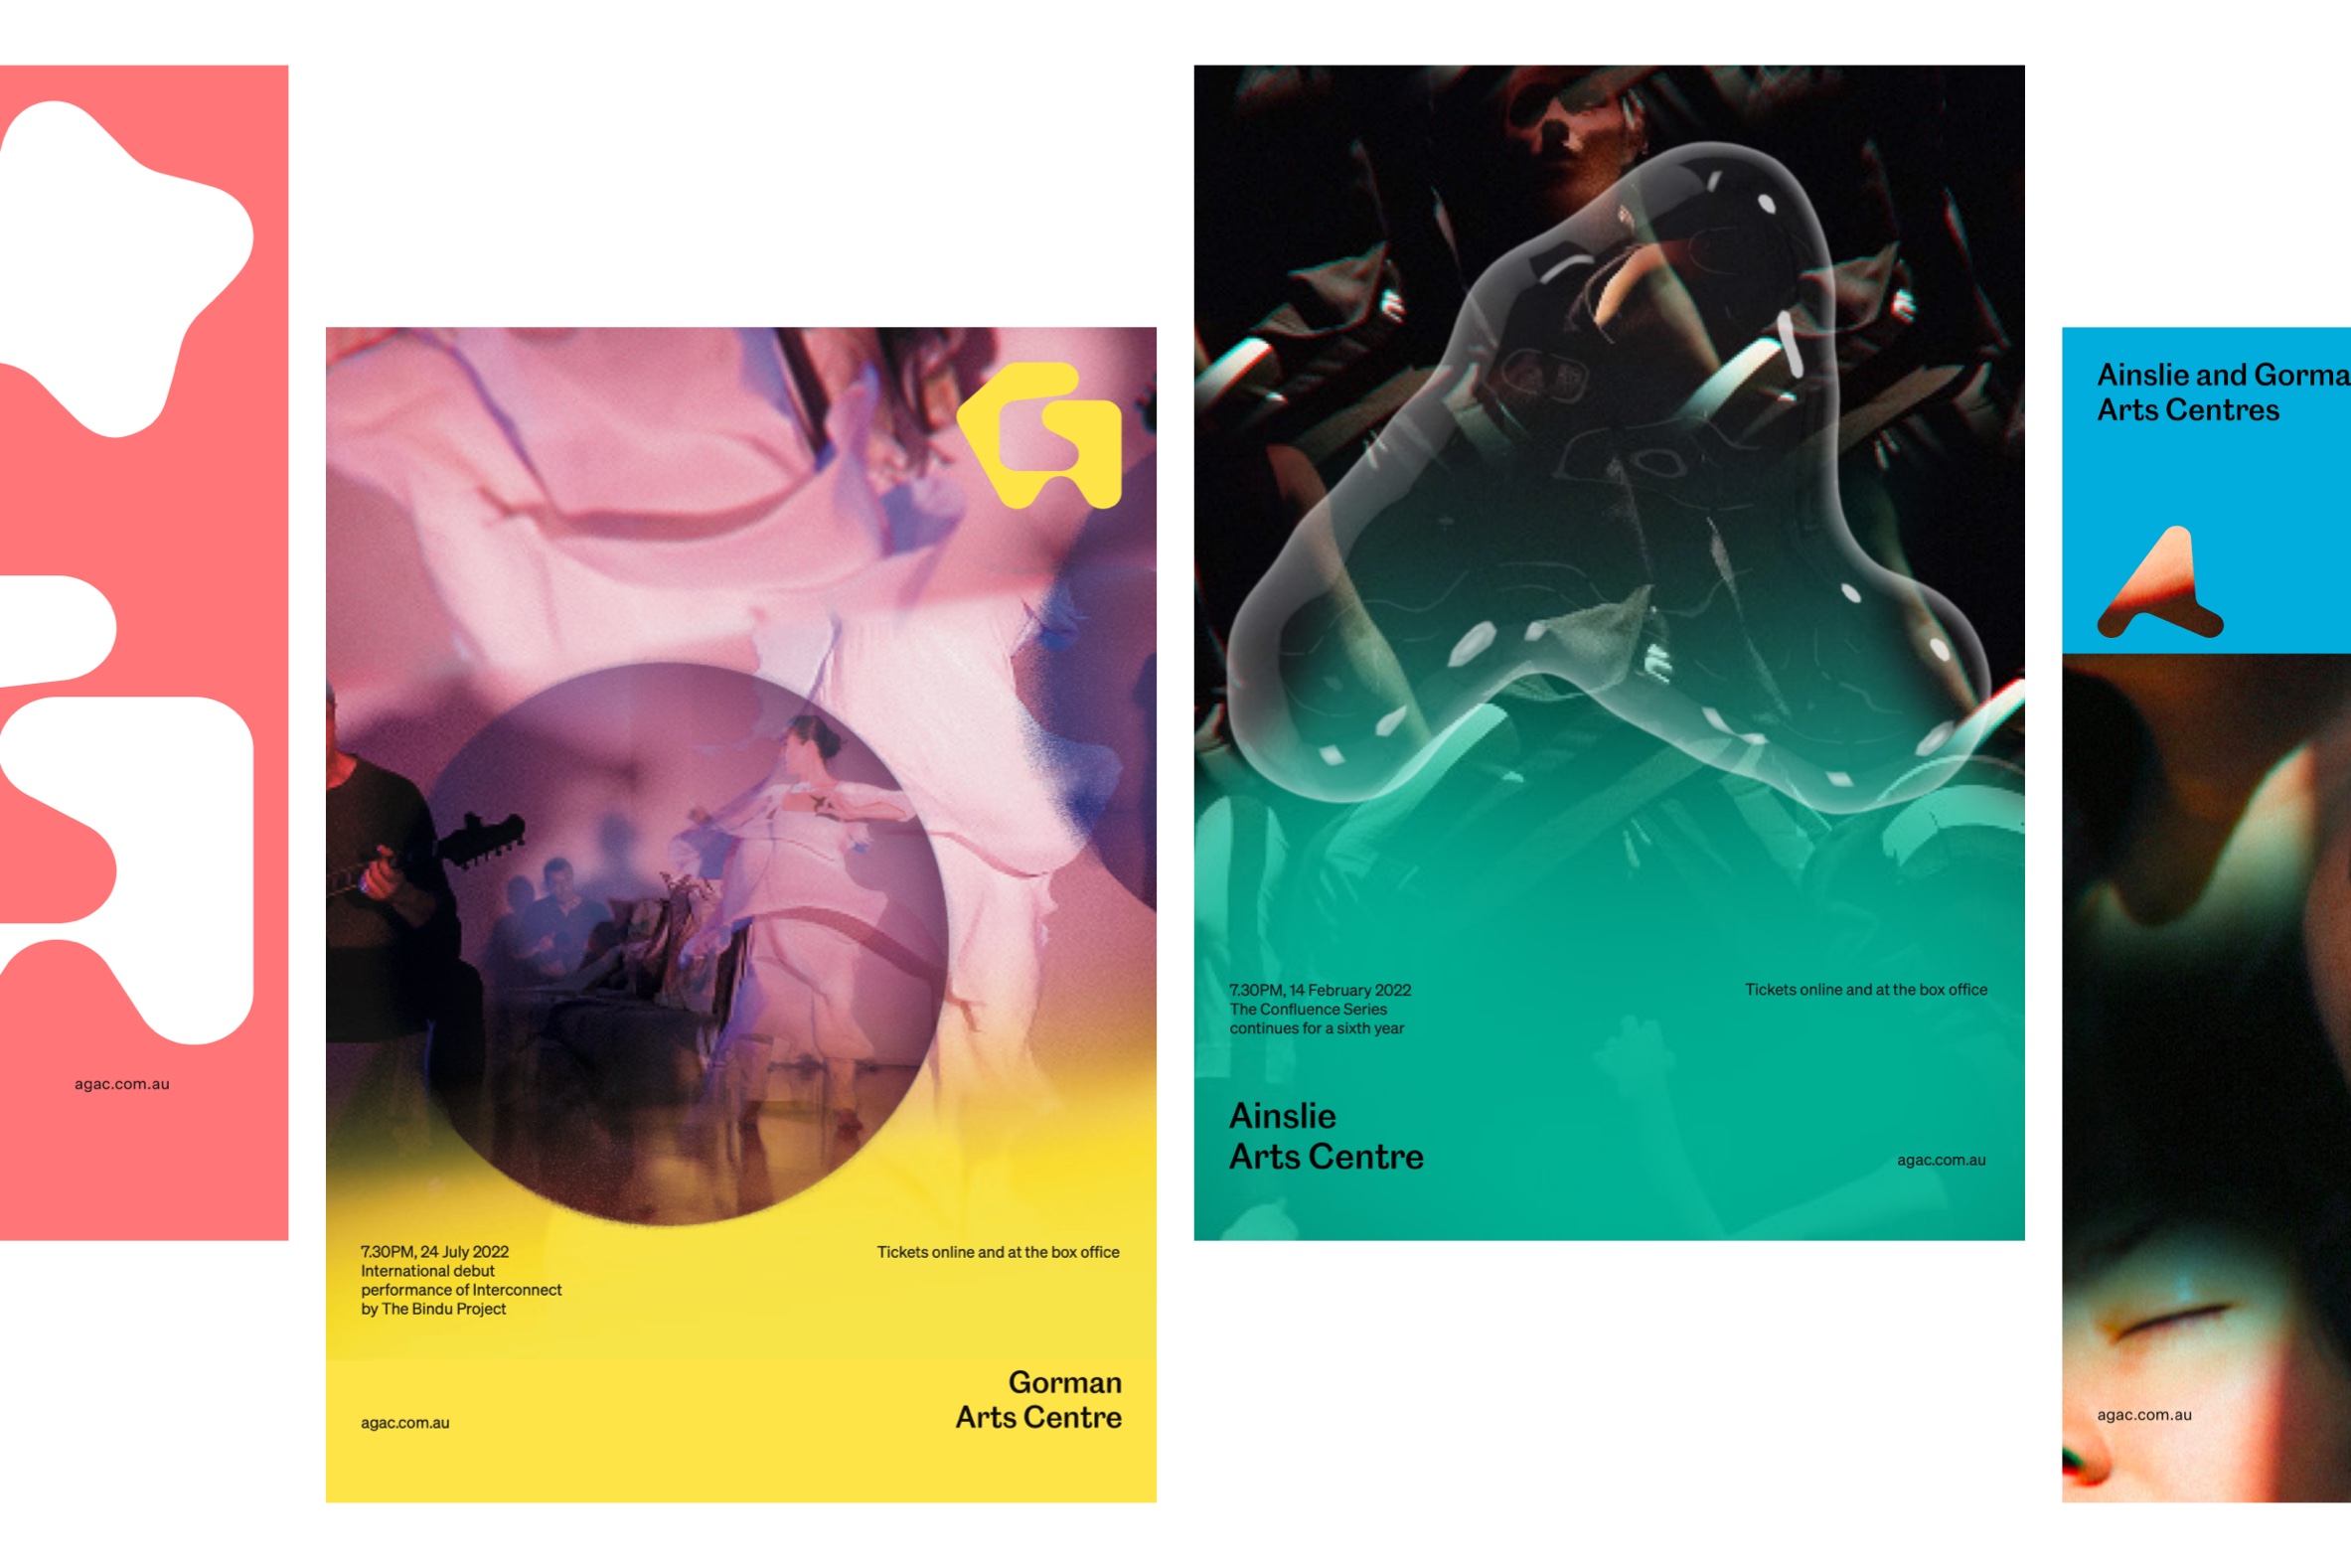 Four posters for Ainslie and Gorman Arts Centres, side by side.